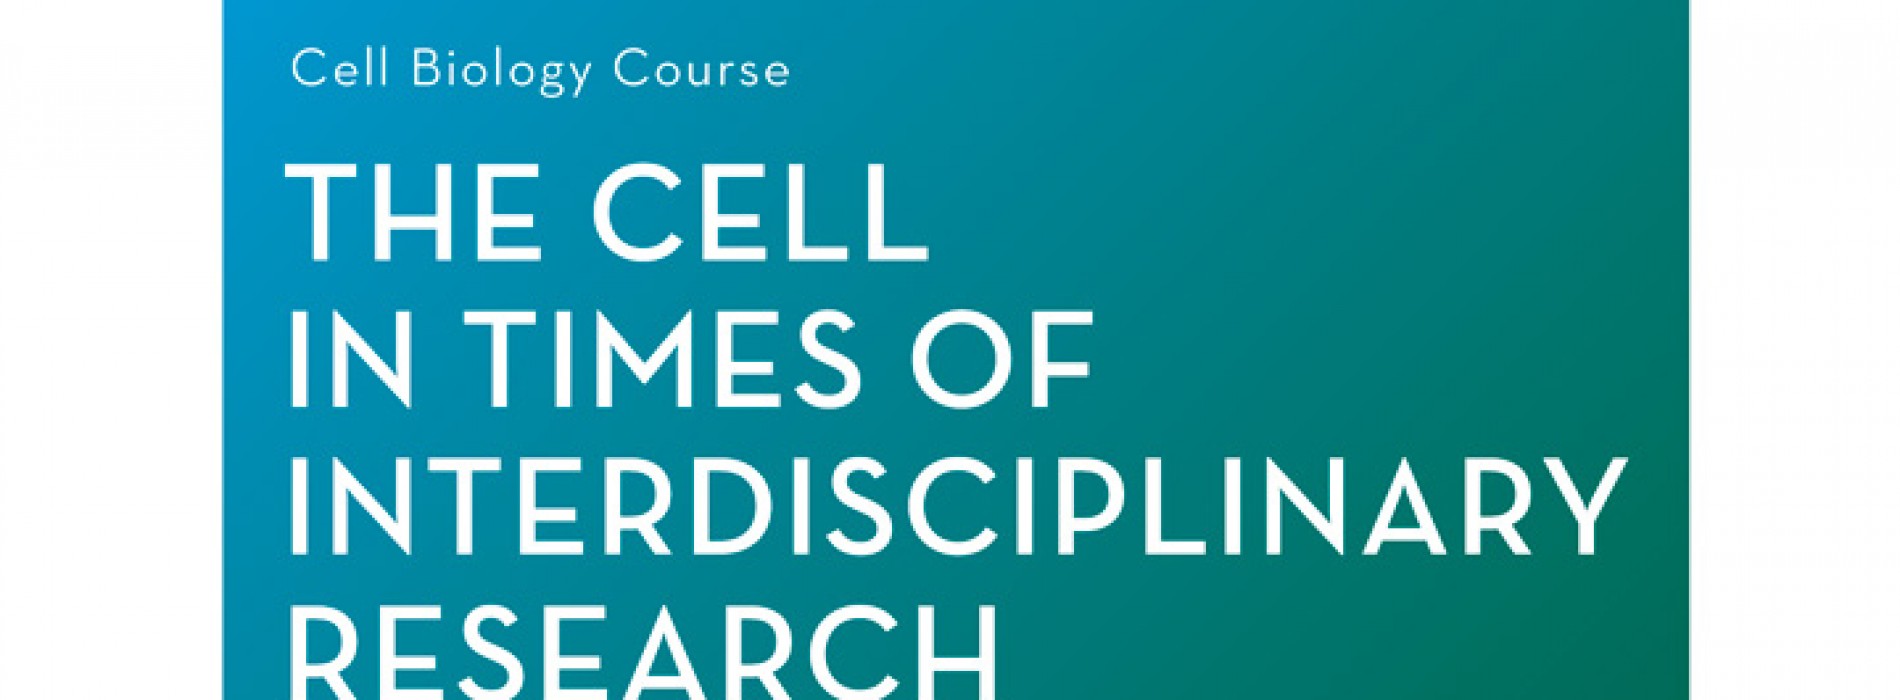 Cell Biology Course 2016